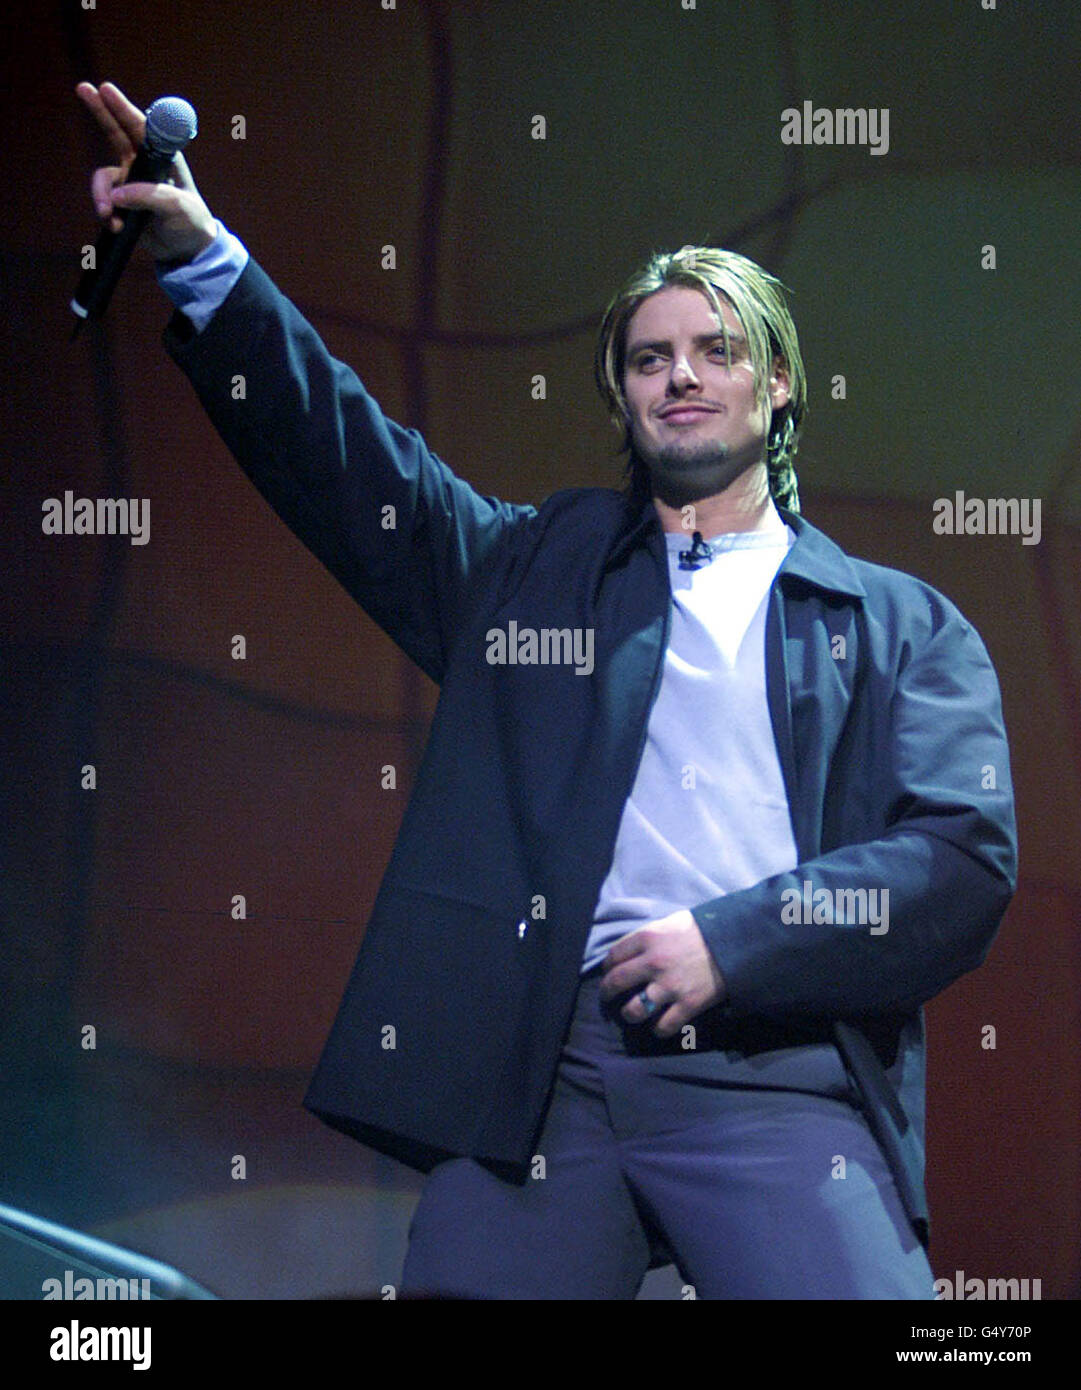 skibsbygning falme Blændende Boyzone Keith Duffy High Resolution Stock Photography and Images - Alamy